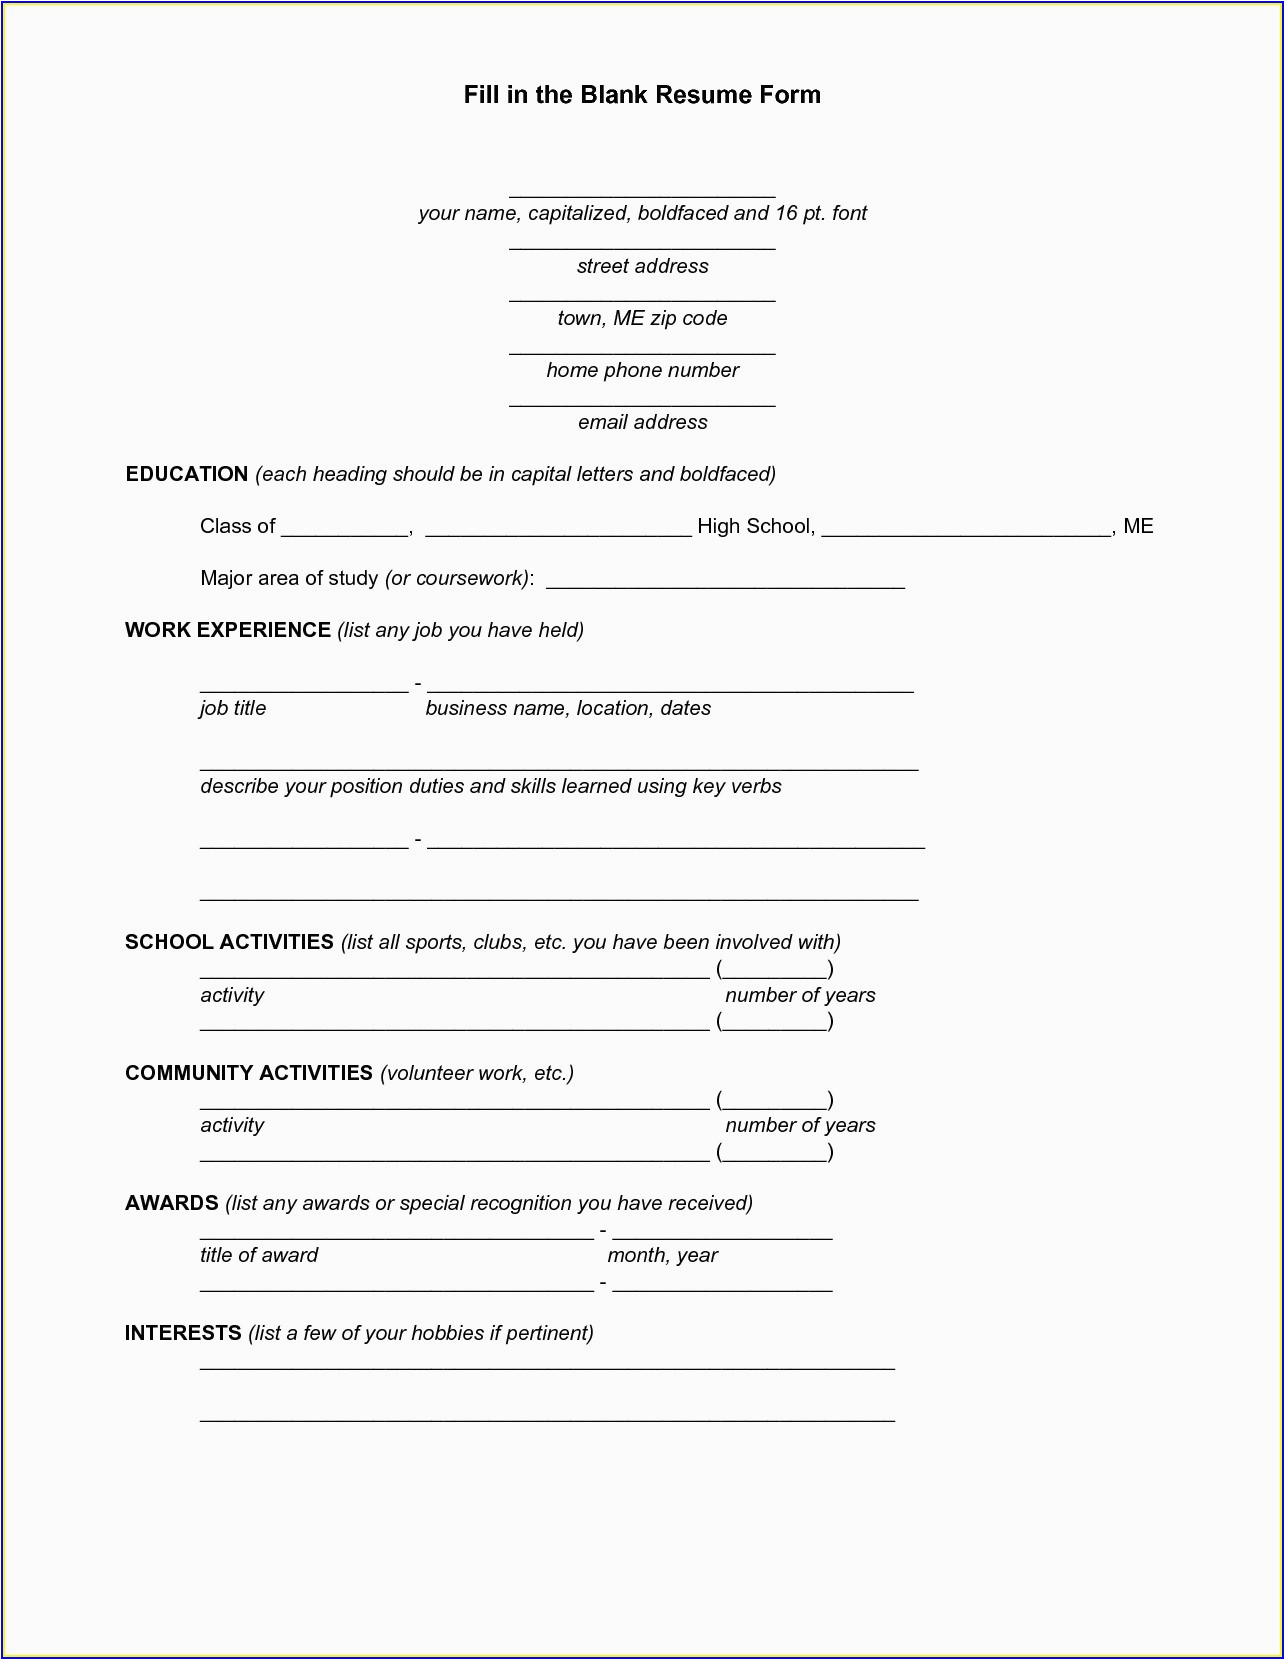 Resume Templates to Fill In the Blanks Fill In the Blank Resume Templates for Microsoft Word